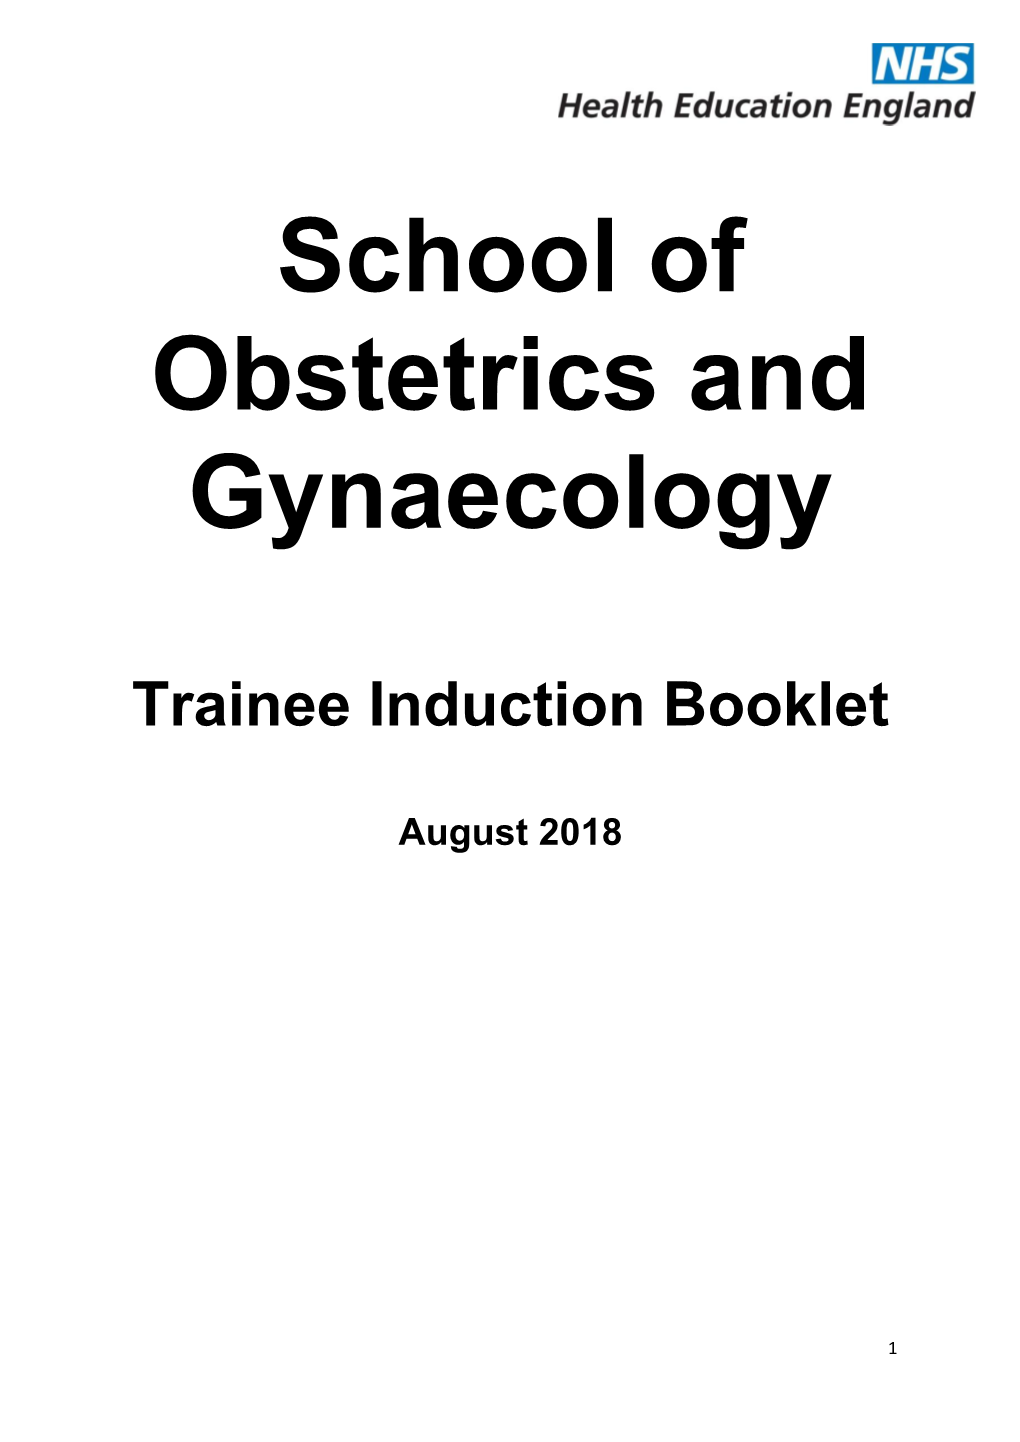 School of Obstetrics and Gynaecology